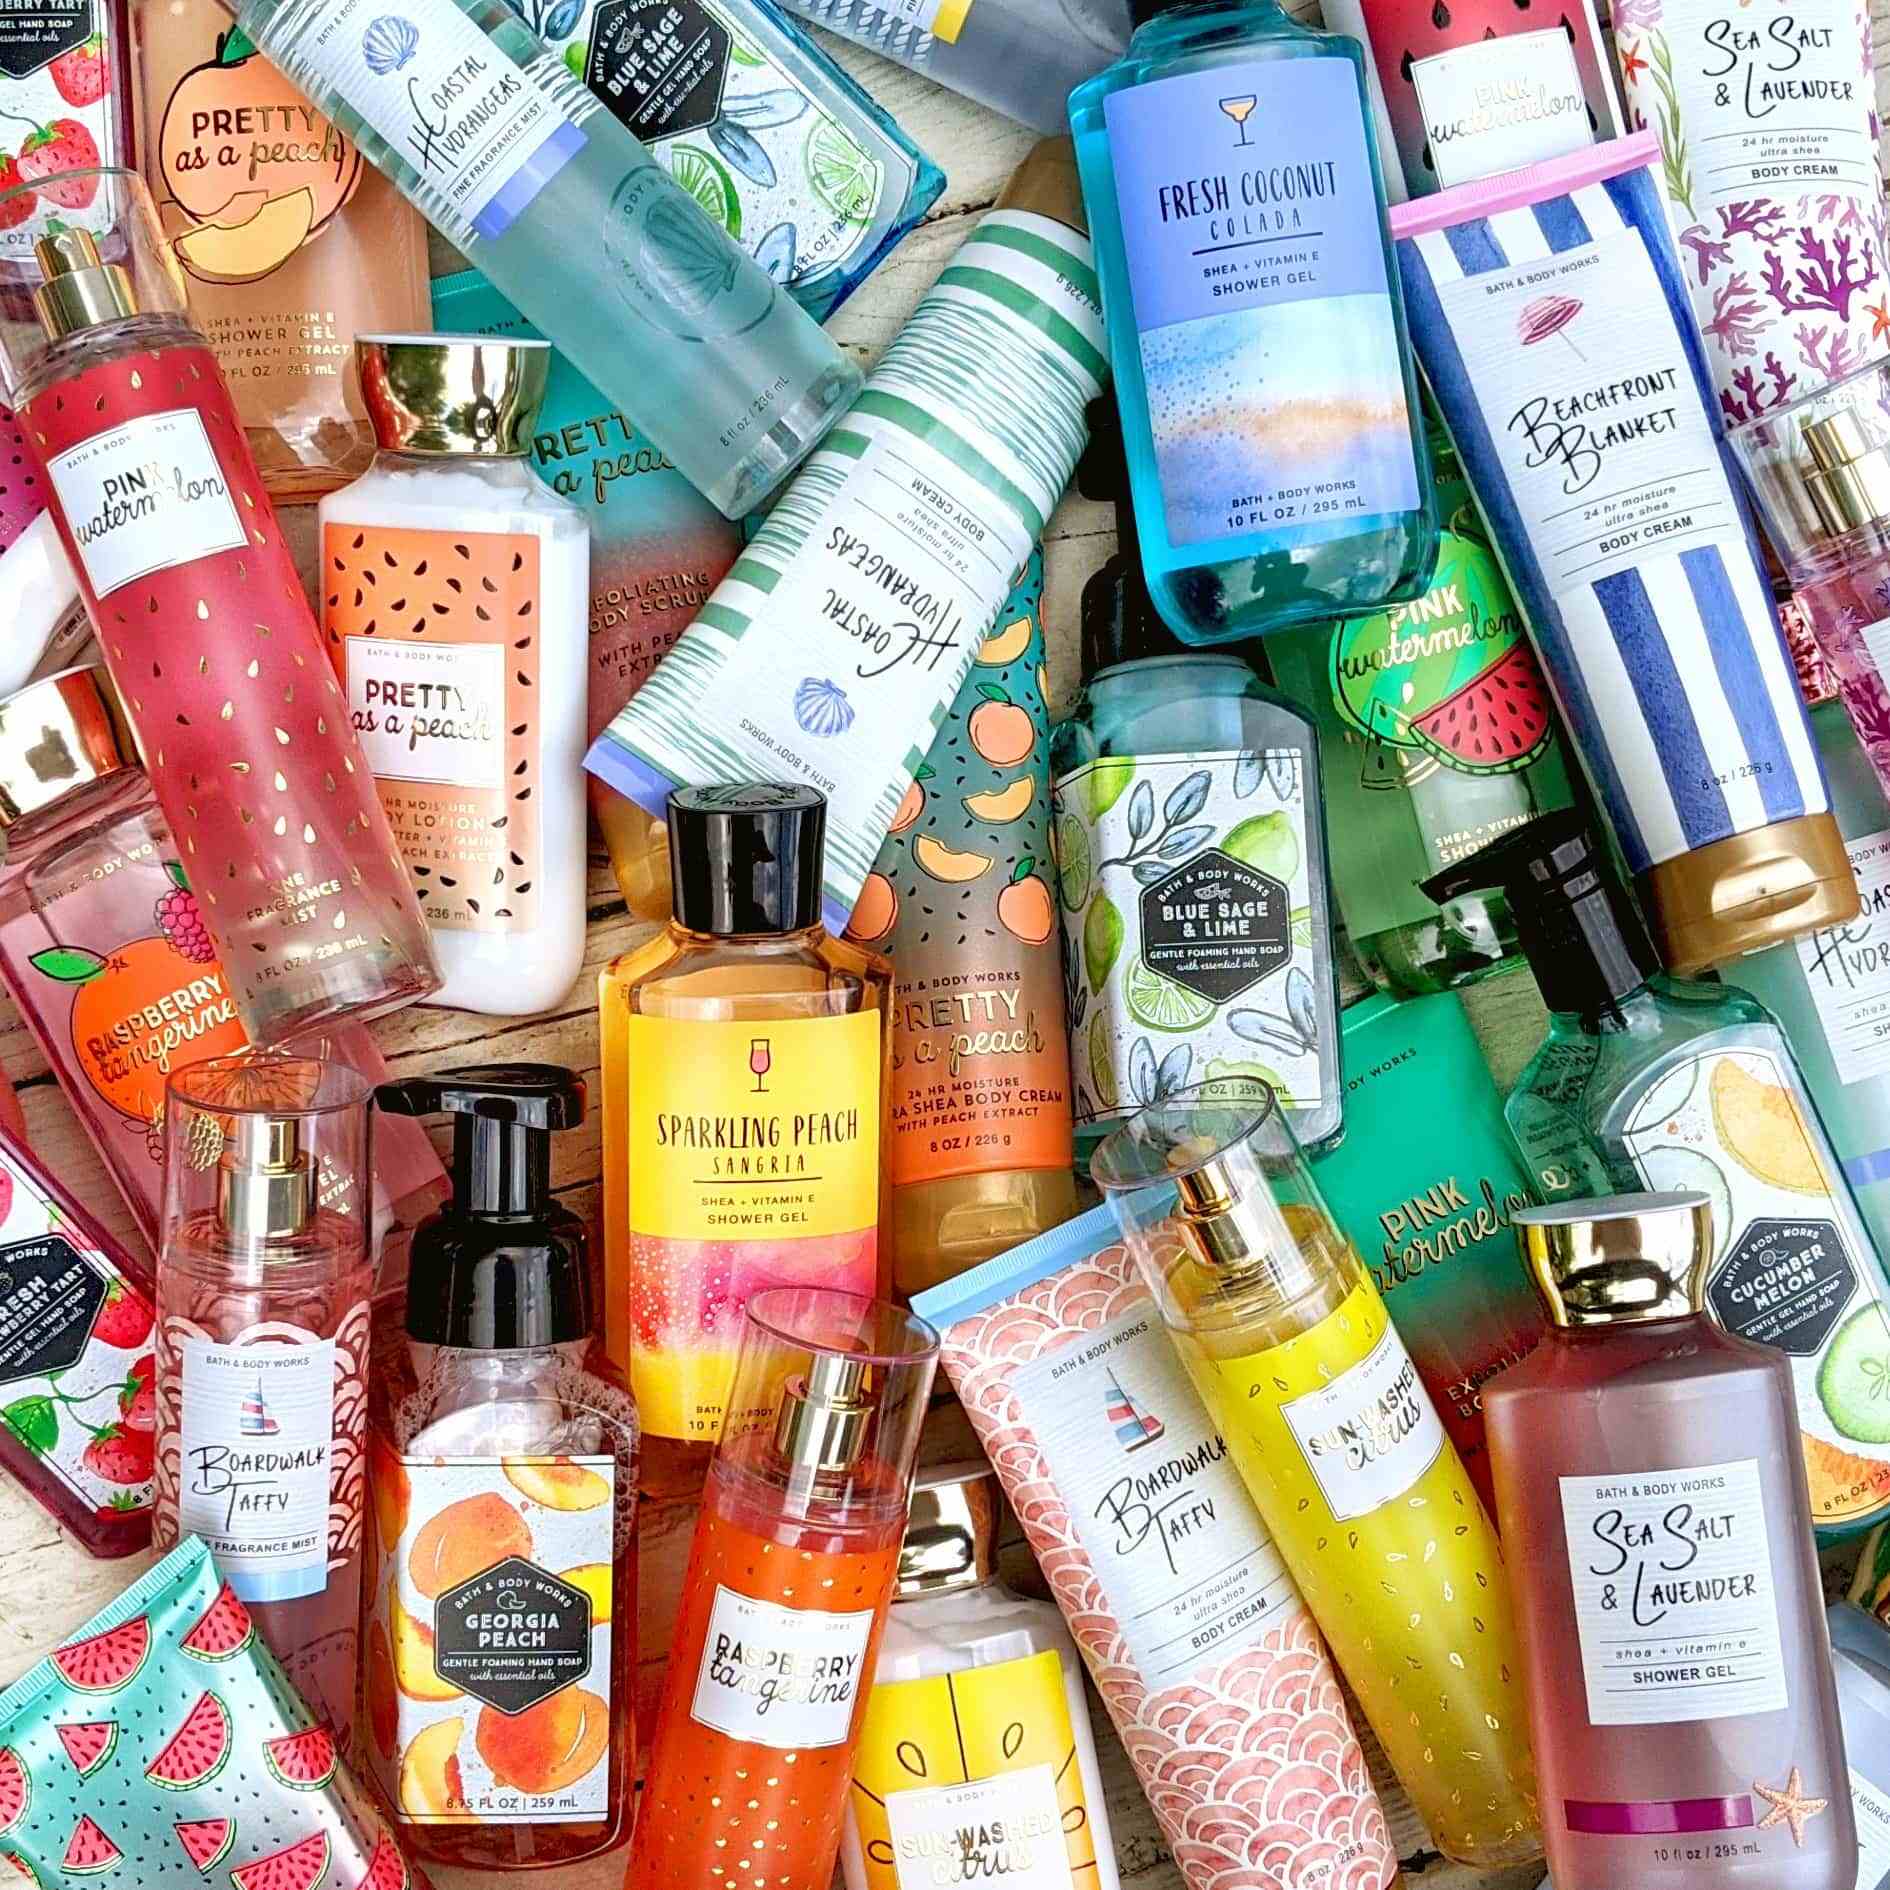 BATH AND BODY WORKS UAE | Sale & Offers | Locations | Store Info